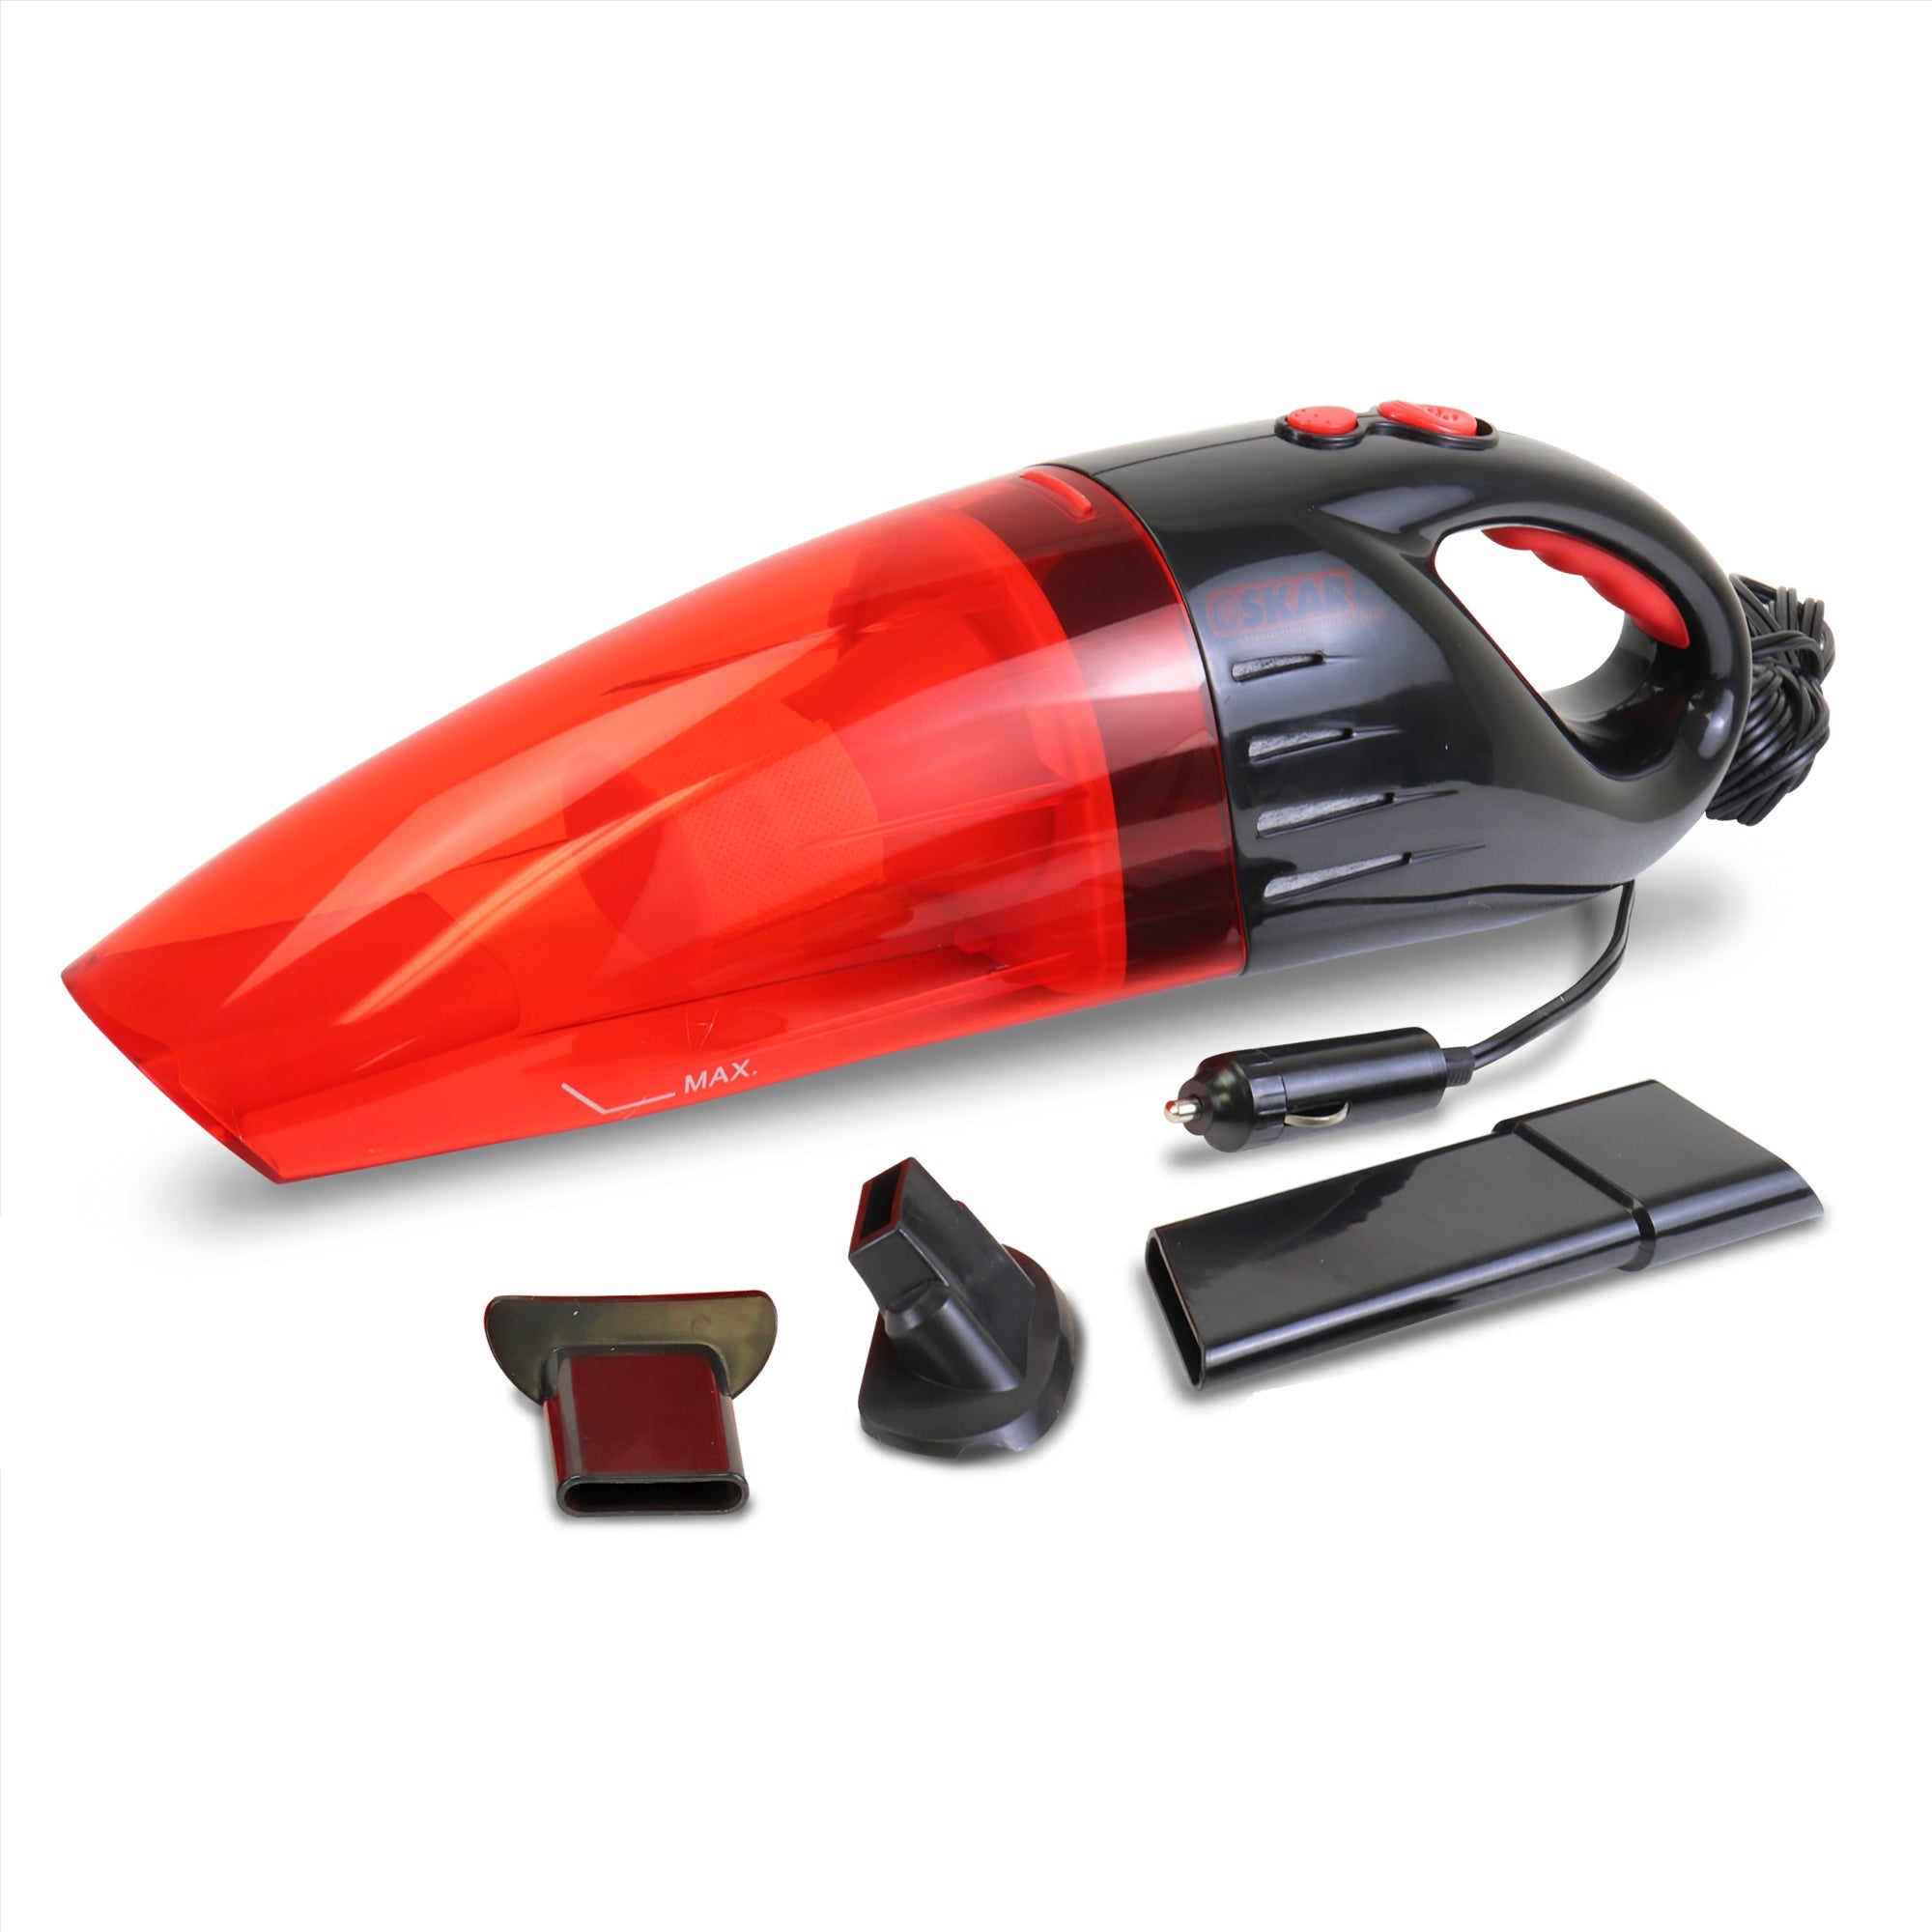 Product shot of Oskar 12V handheld vehicle vacuum with the 12V power cord visible and 3 nozzle attachments below